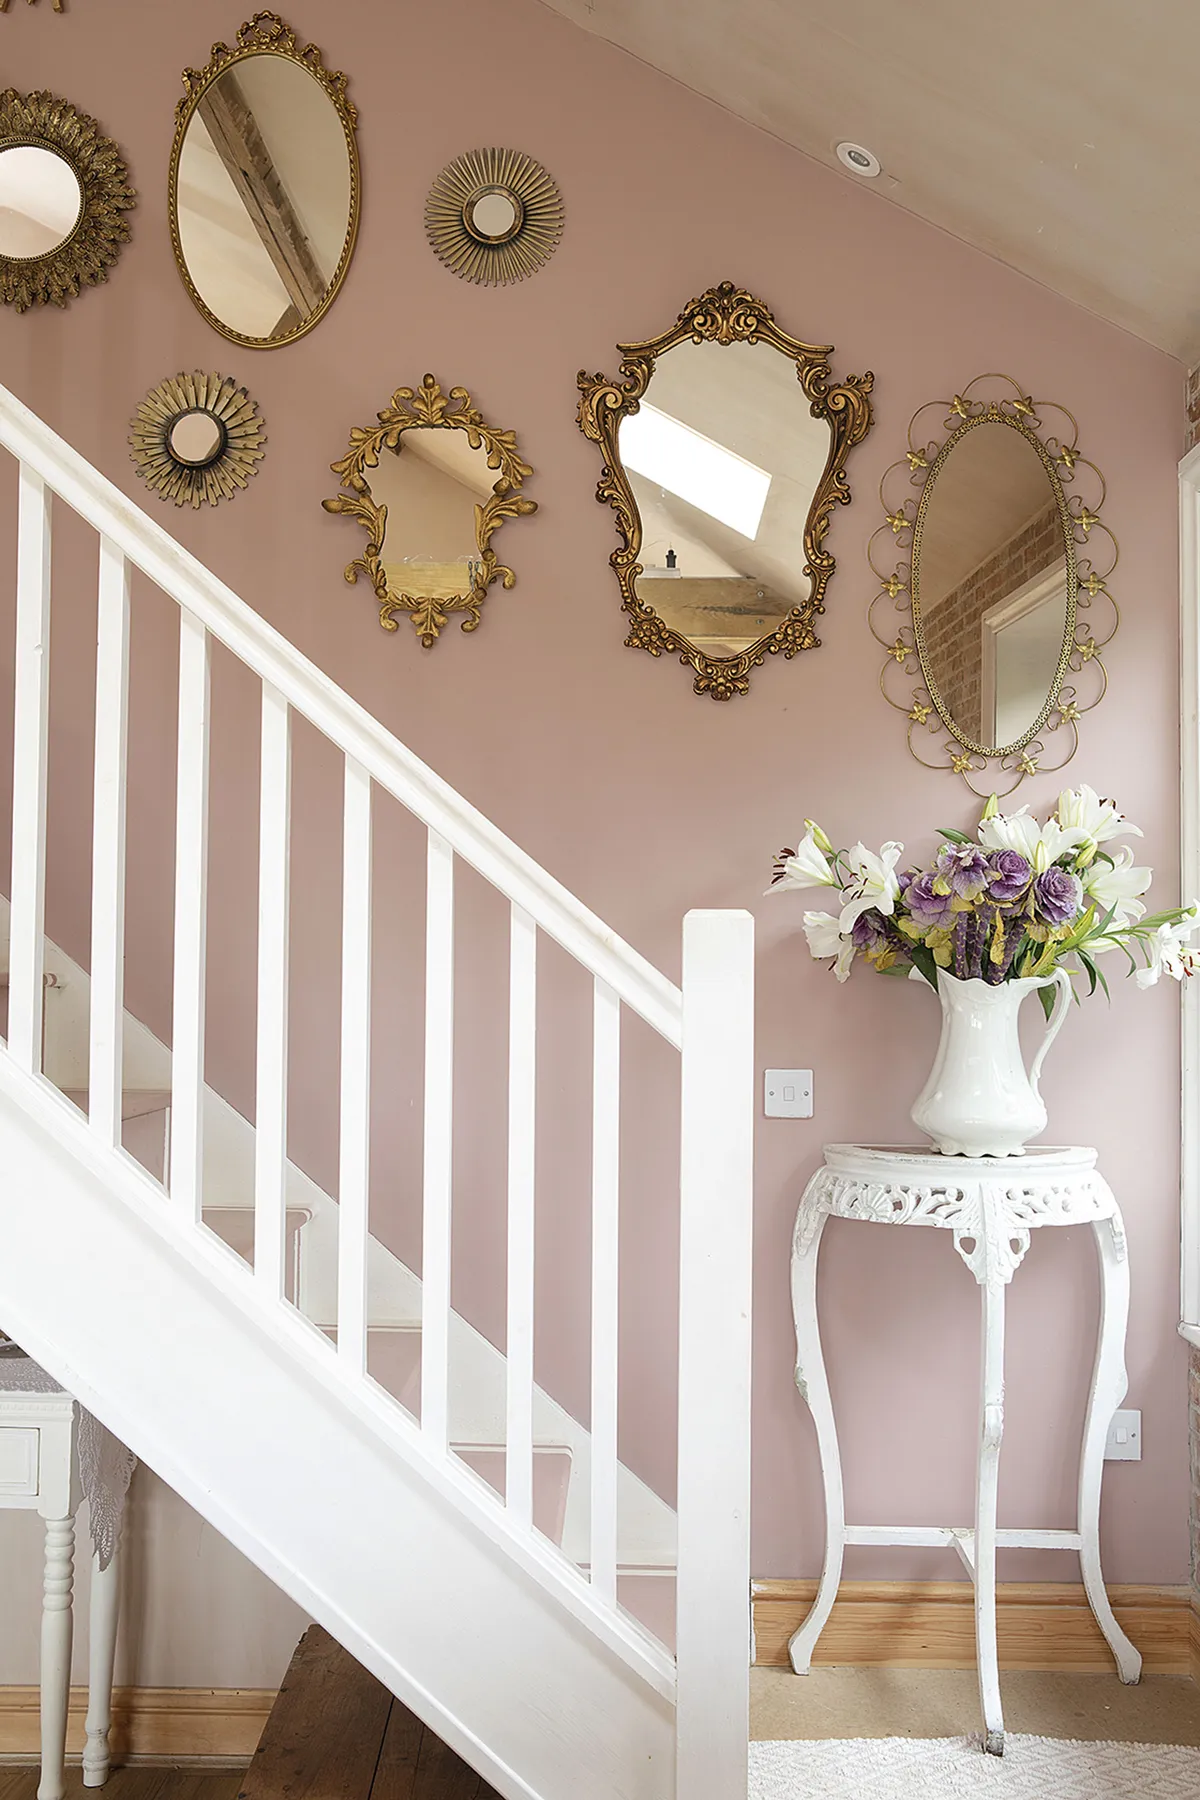 On the pink wall leading to the master bedroom, Sandra has hung a mixture of new and vintage mirrors. ‘The little round ones were £3.99 for a set of three from The Range. They were brown and I sprayed them gold to match the others,’ says Sandra. She painted the wall in pink chalk paint so her mirror collection would really pop